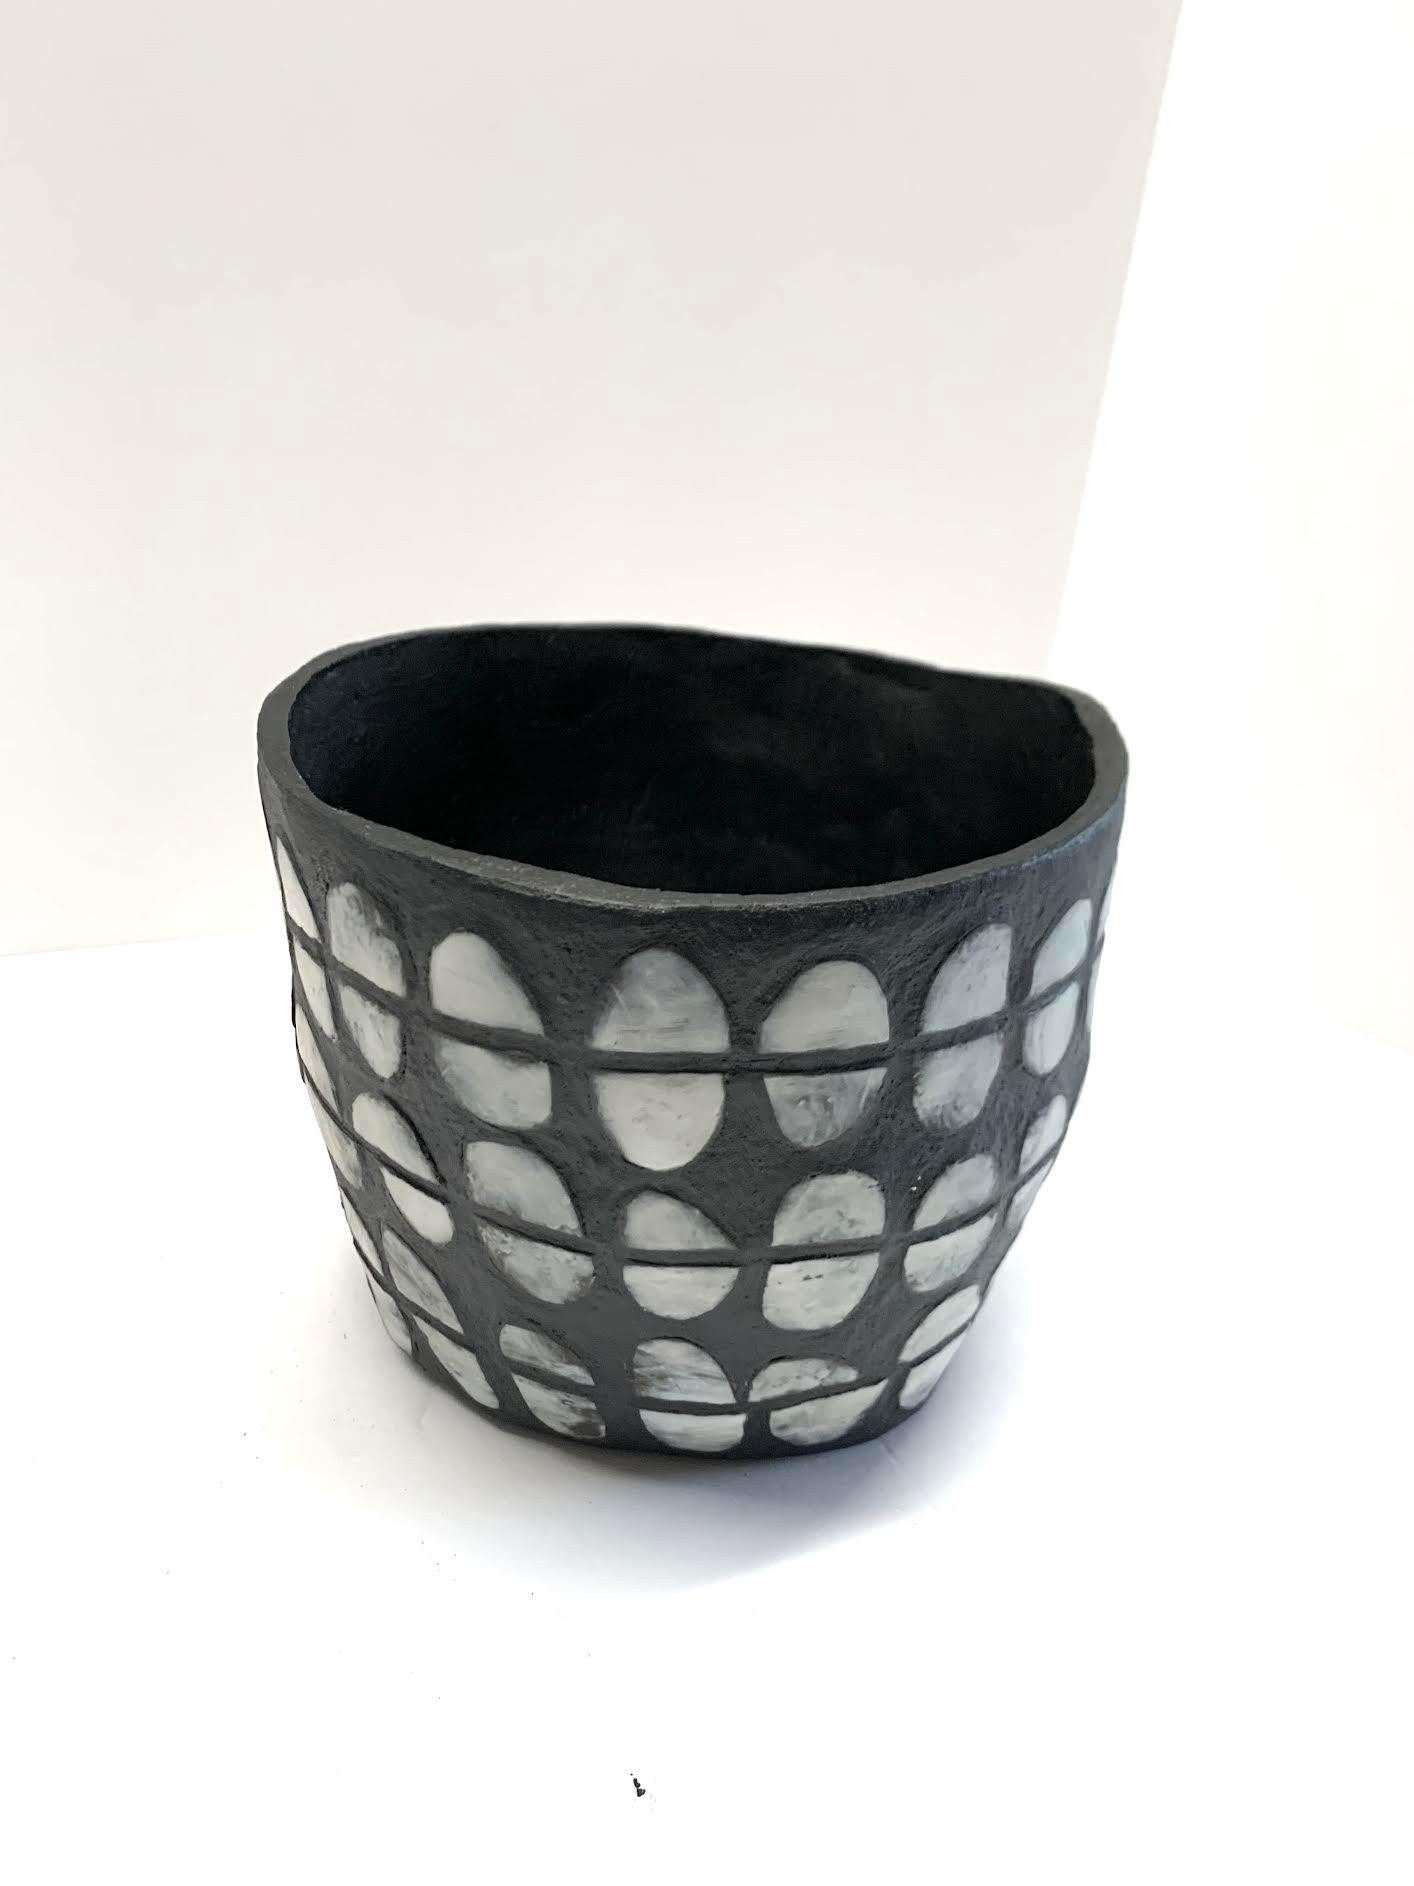 Contemporary American ceramicist Brenda Holzke hand made unique one of a kind stoneware vase made of dark stoneware and porcelain slip.
Wide neck and split oval design.